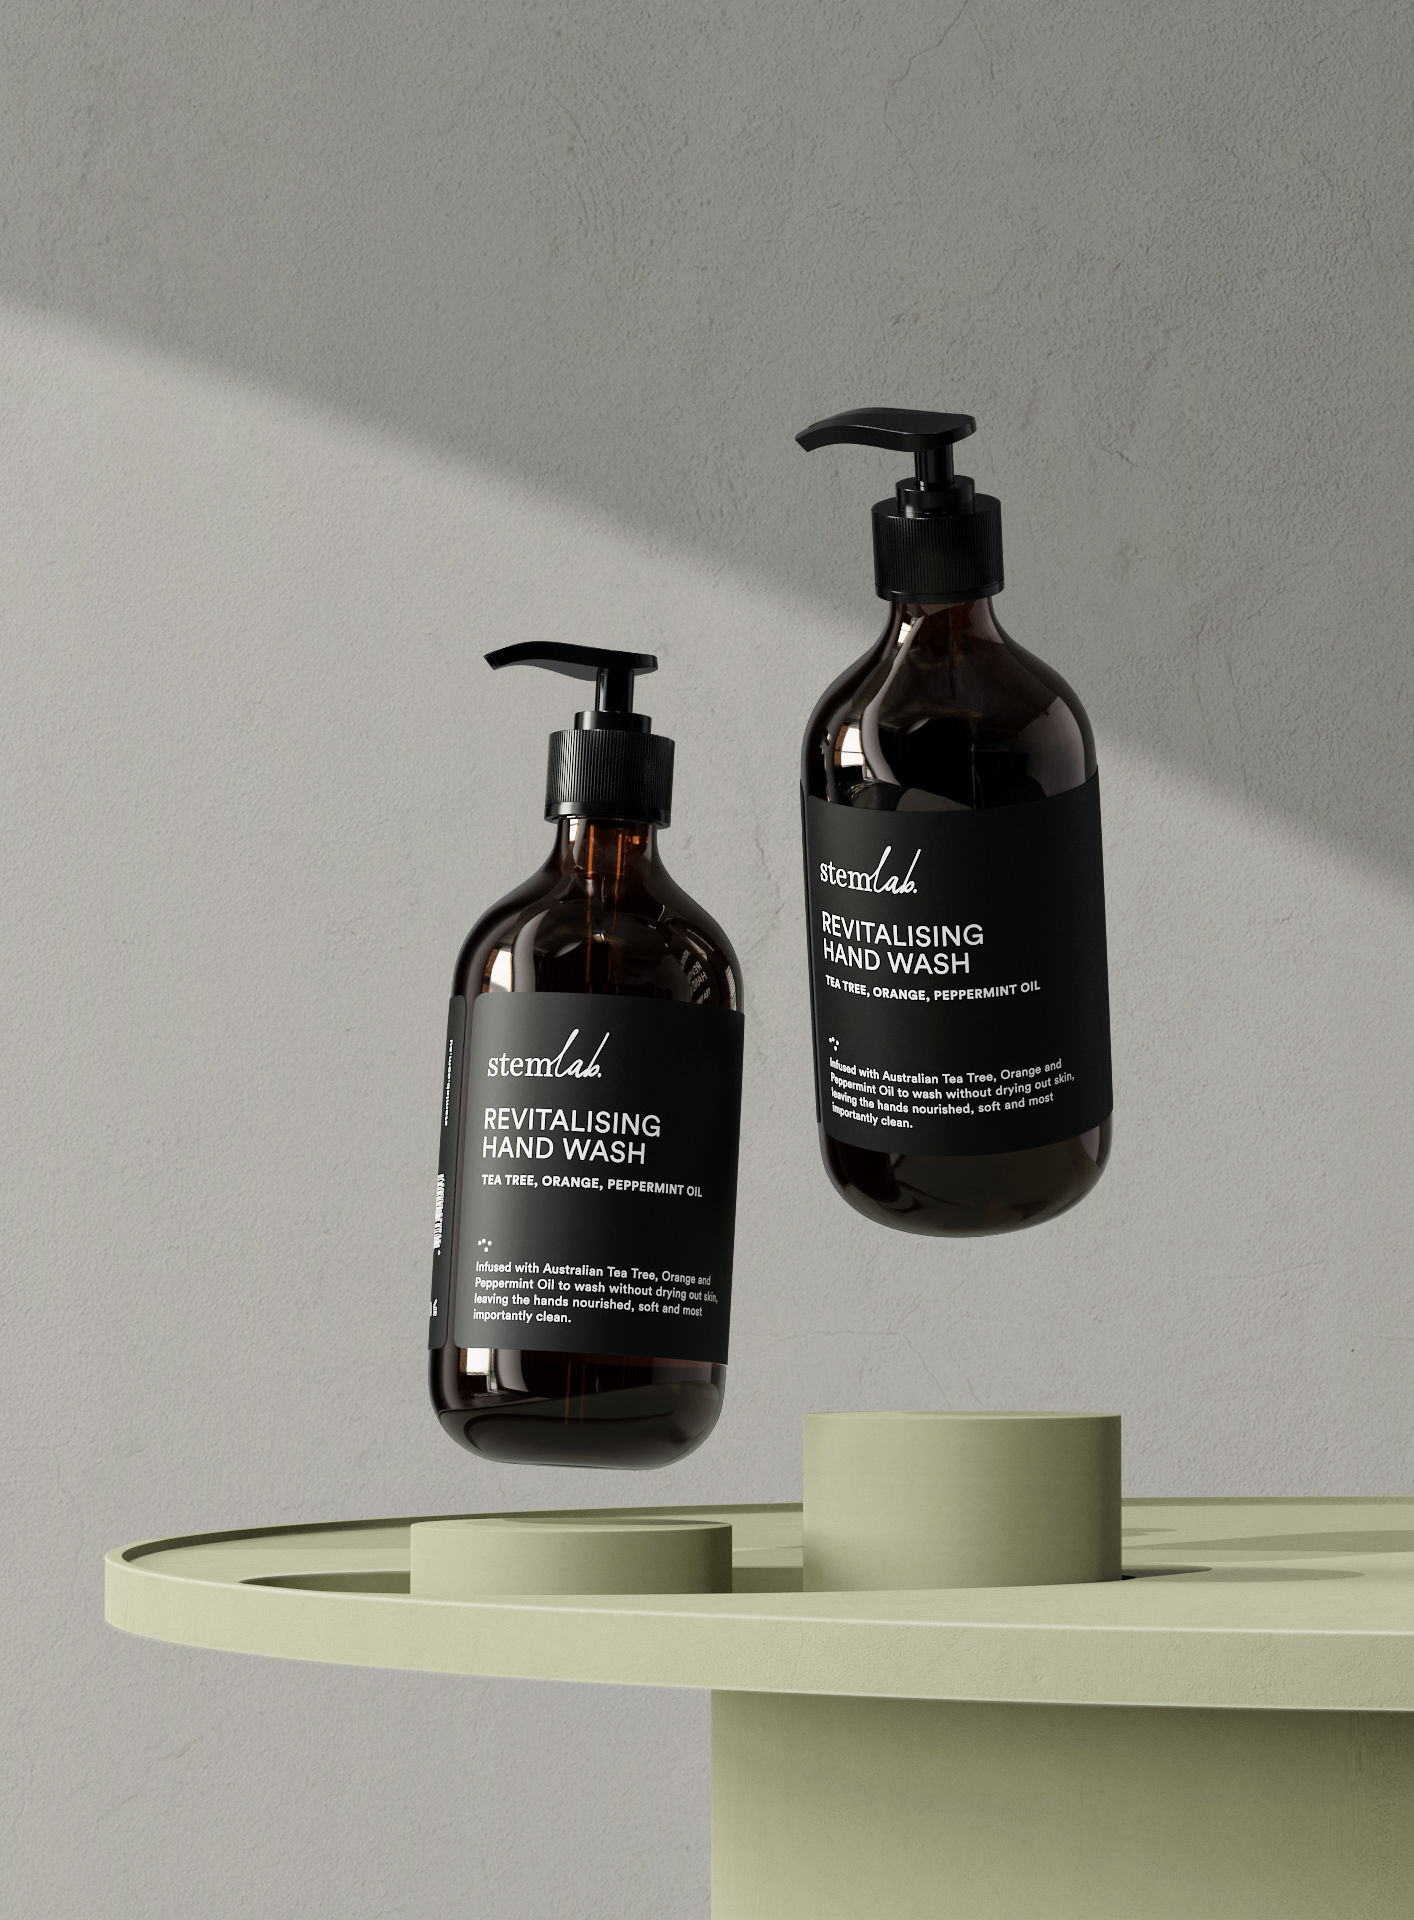 Stemlab Hand Wash Life Style Shot Web Cover - Stemlab Retialising Body Wash and Hand Wash CGI product shooting - Sonny Nguyen